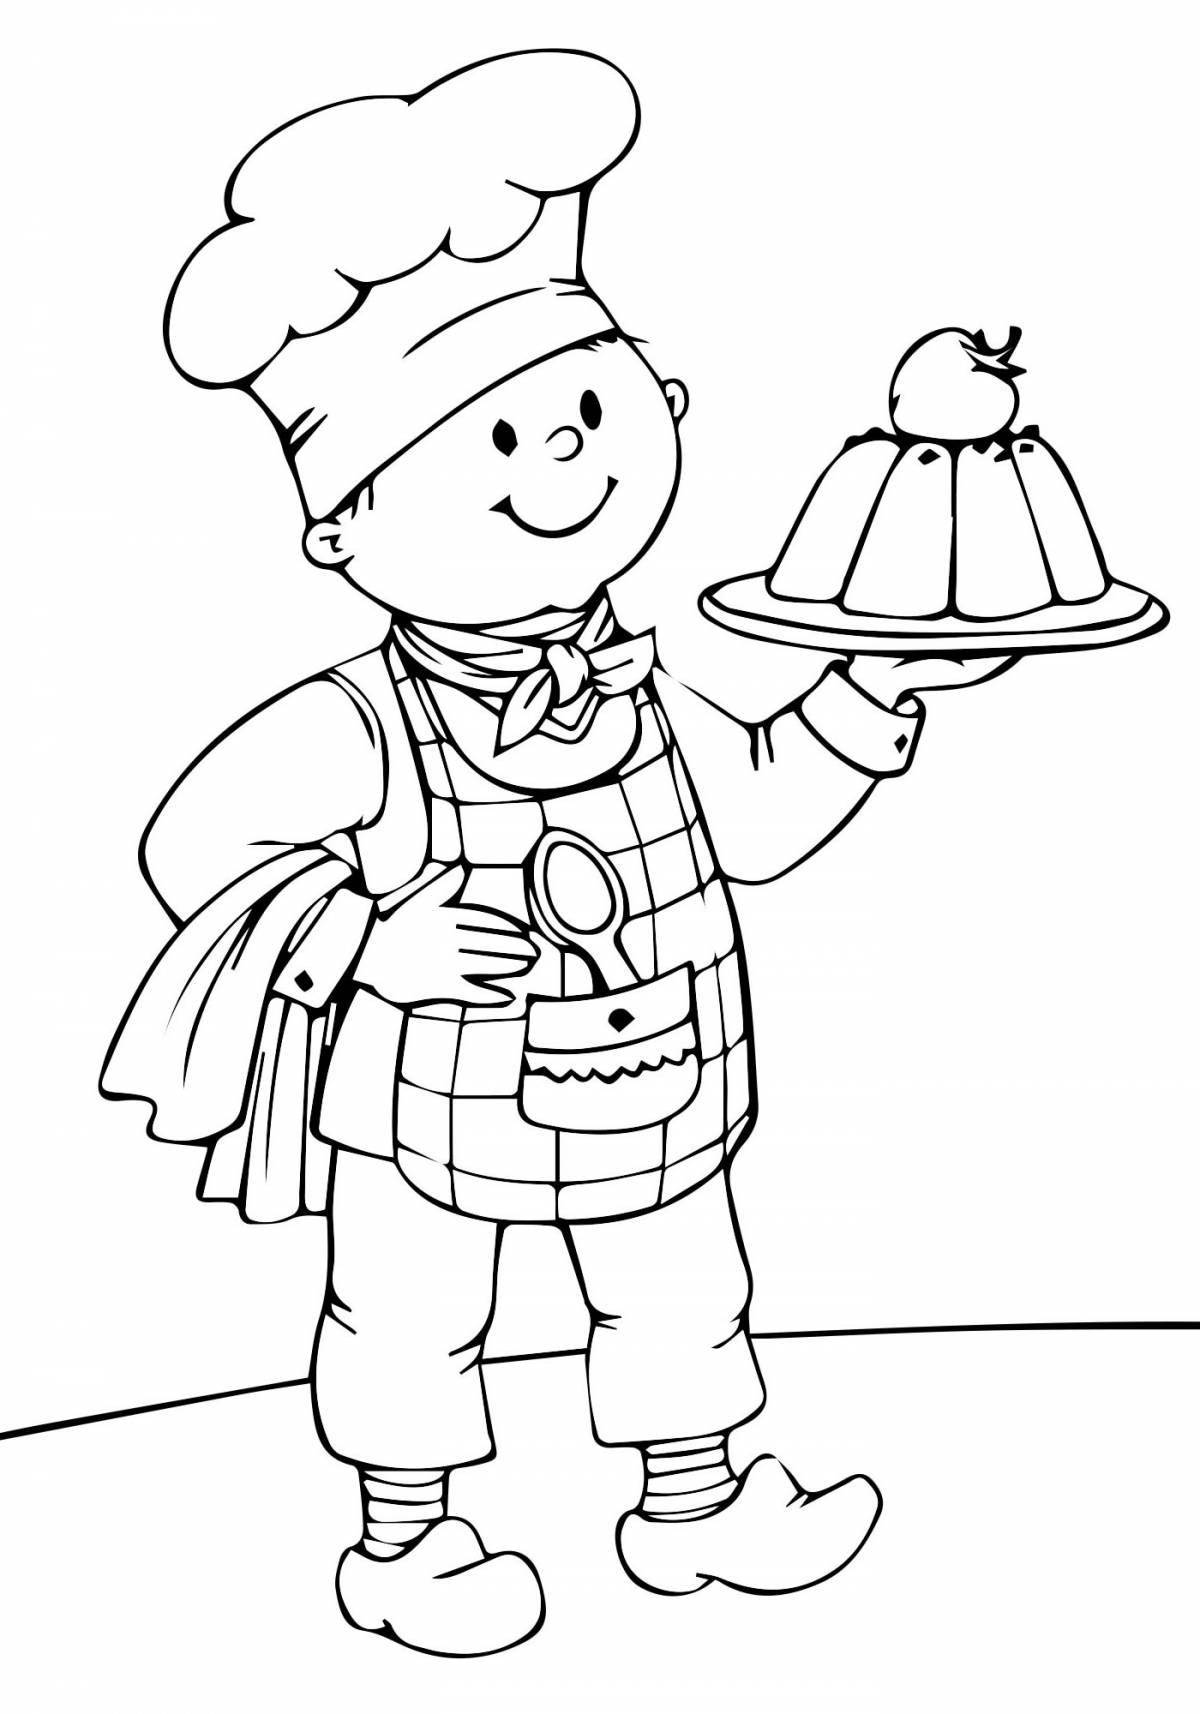 Confectioner's funny coloring book